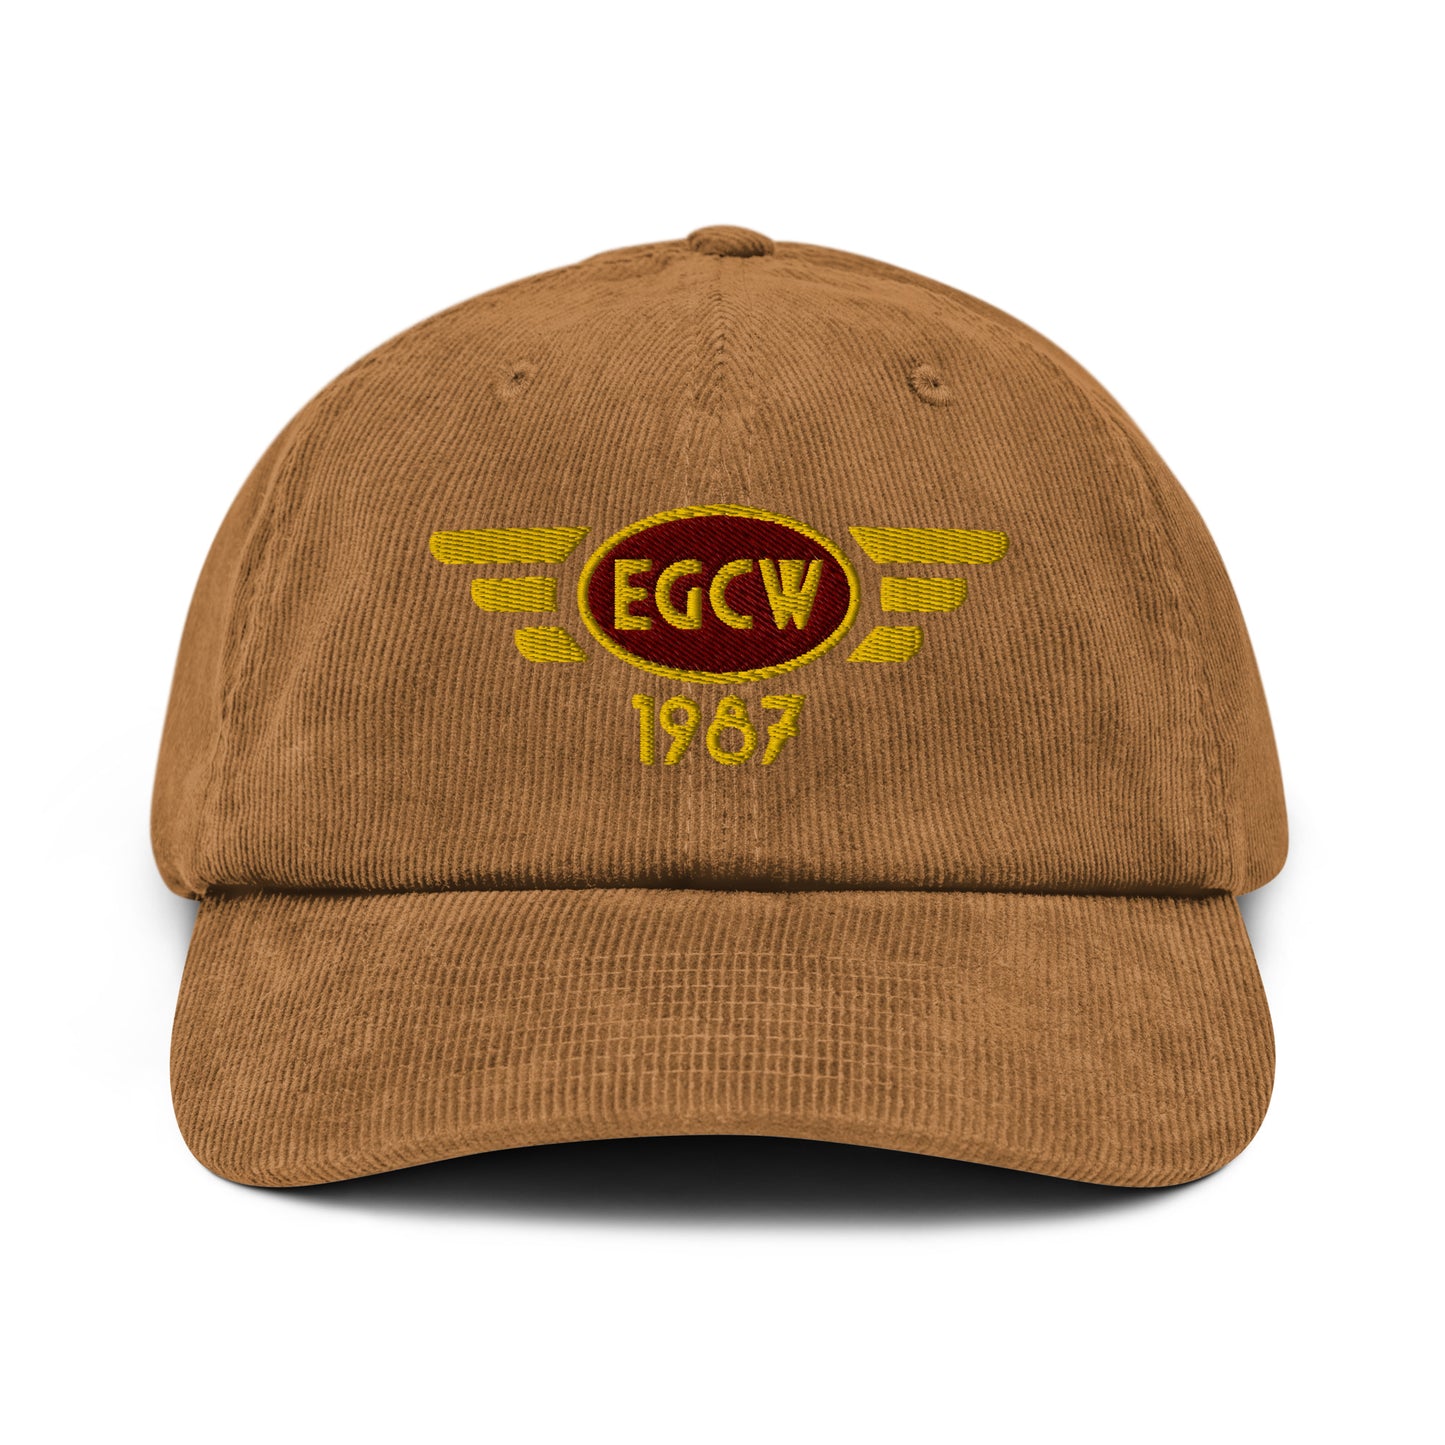 Welshpool Airport corduroy cap with embroidered ICAO code.